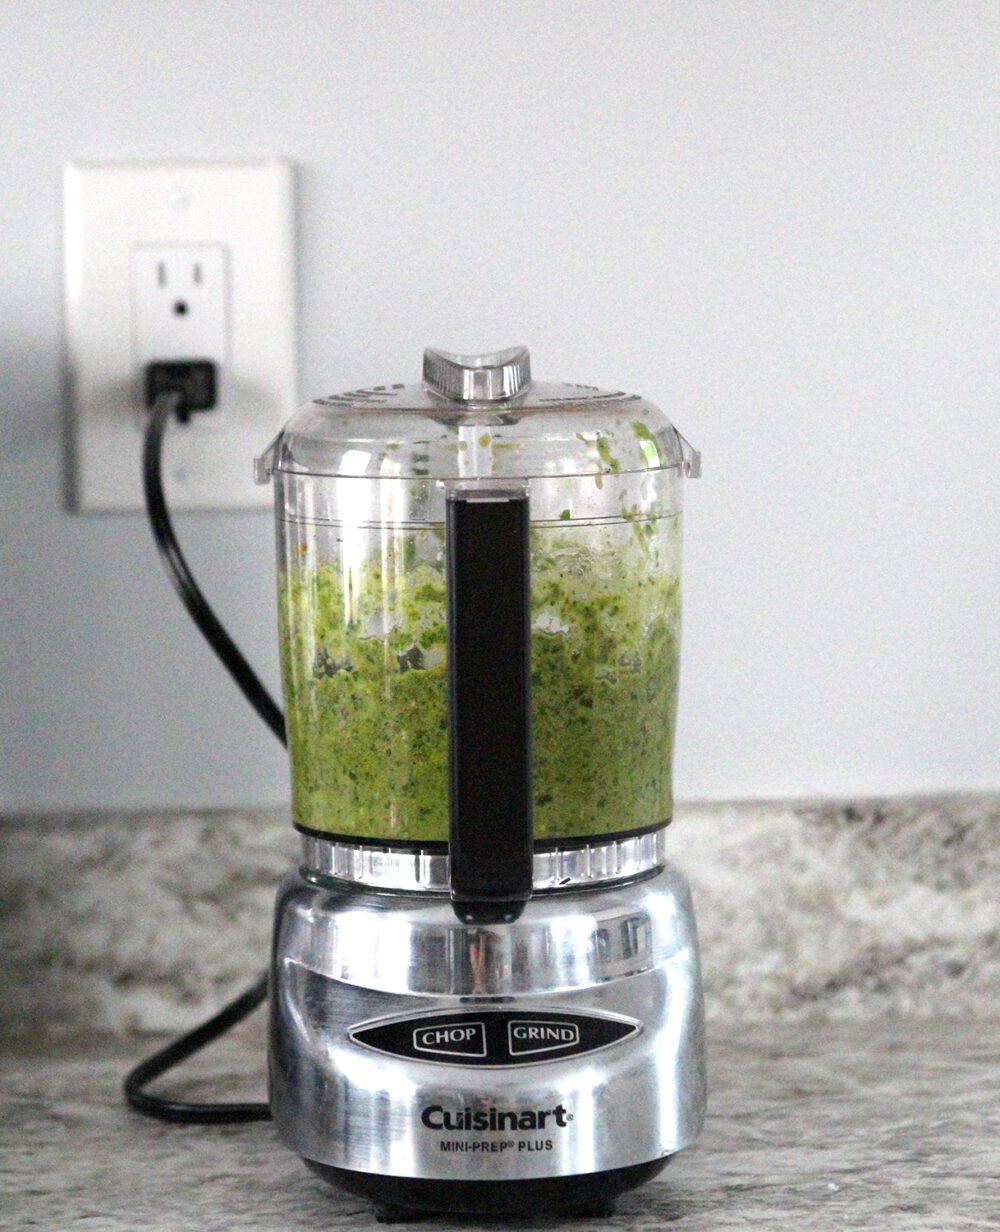 A Cuisinart Mini-Prep Plus sits on a counter. The bowl is filled with green pesto.